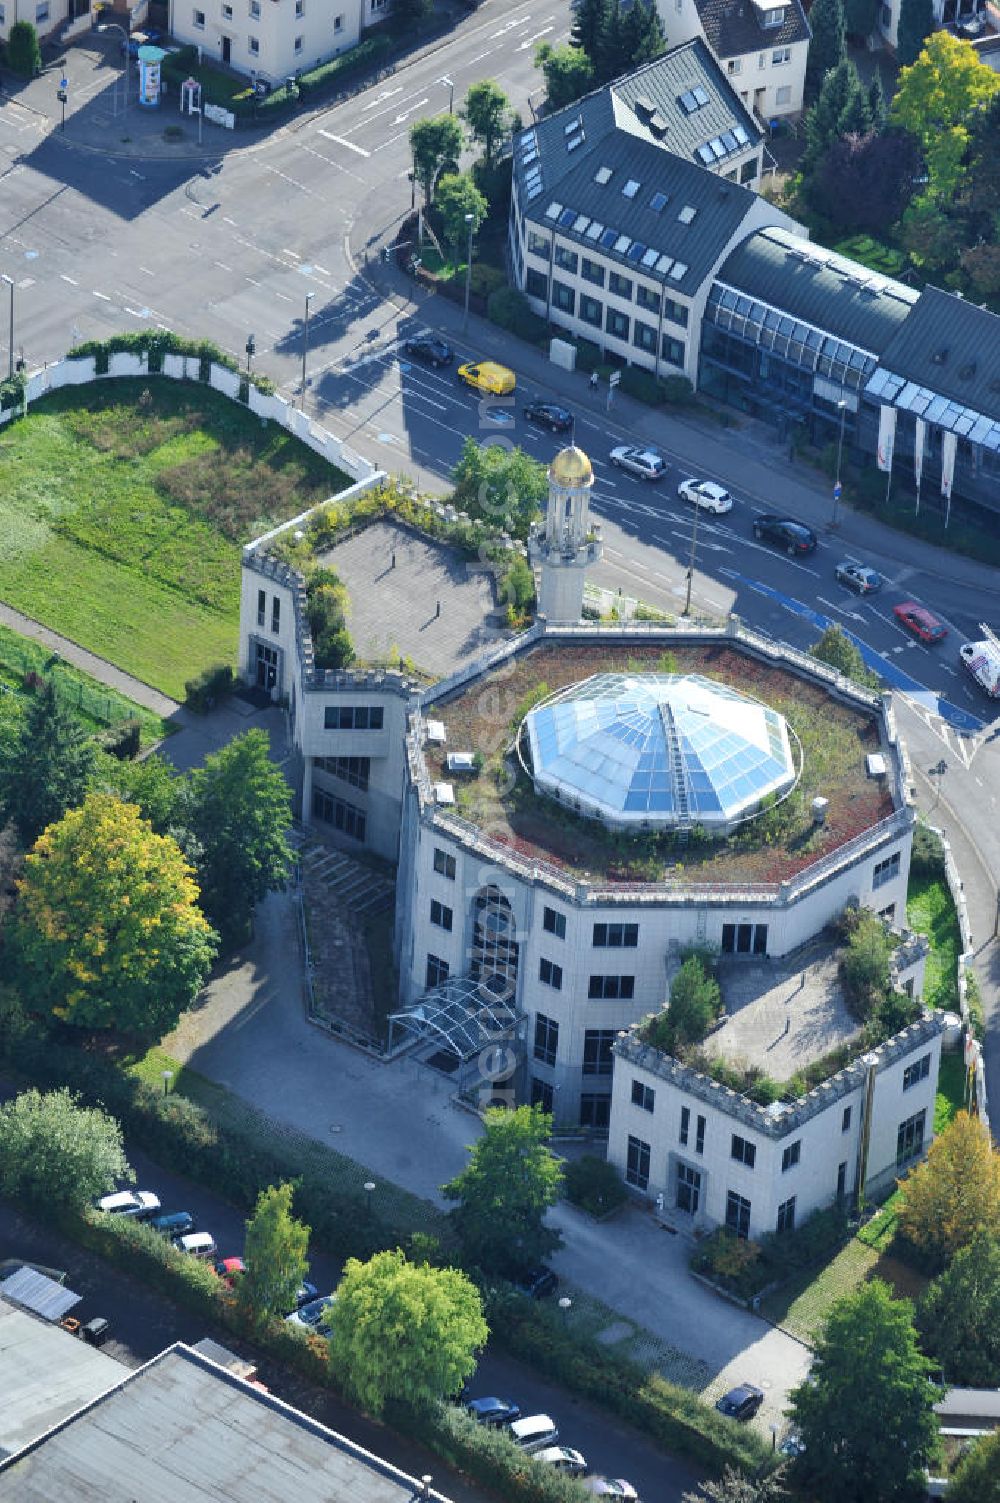 Aerial image BONN - OT Bad Godesberg - The King Fahd Academy (named after King Fahd ibn Abd al-Aziz) is a school financed by Saudi Arabia / Academy for children temporarily living in Germany. The Academy has a mosque attached. The King Fahd Academy, taught by the Saudi curriculum in twelve grades. The Academy conducted a limited liability company is not legally under the supervision of the German school and is not oriented on German curricula